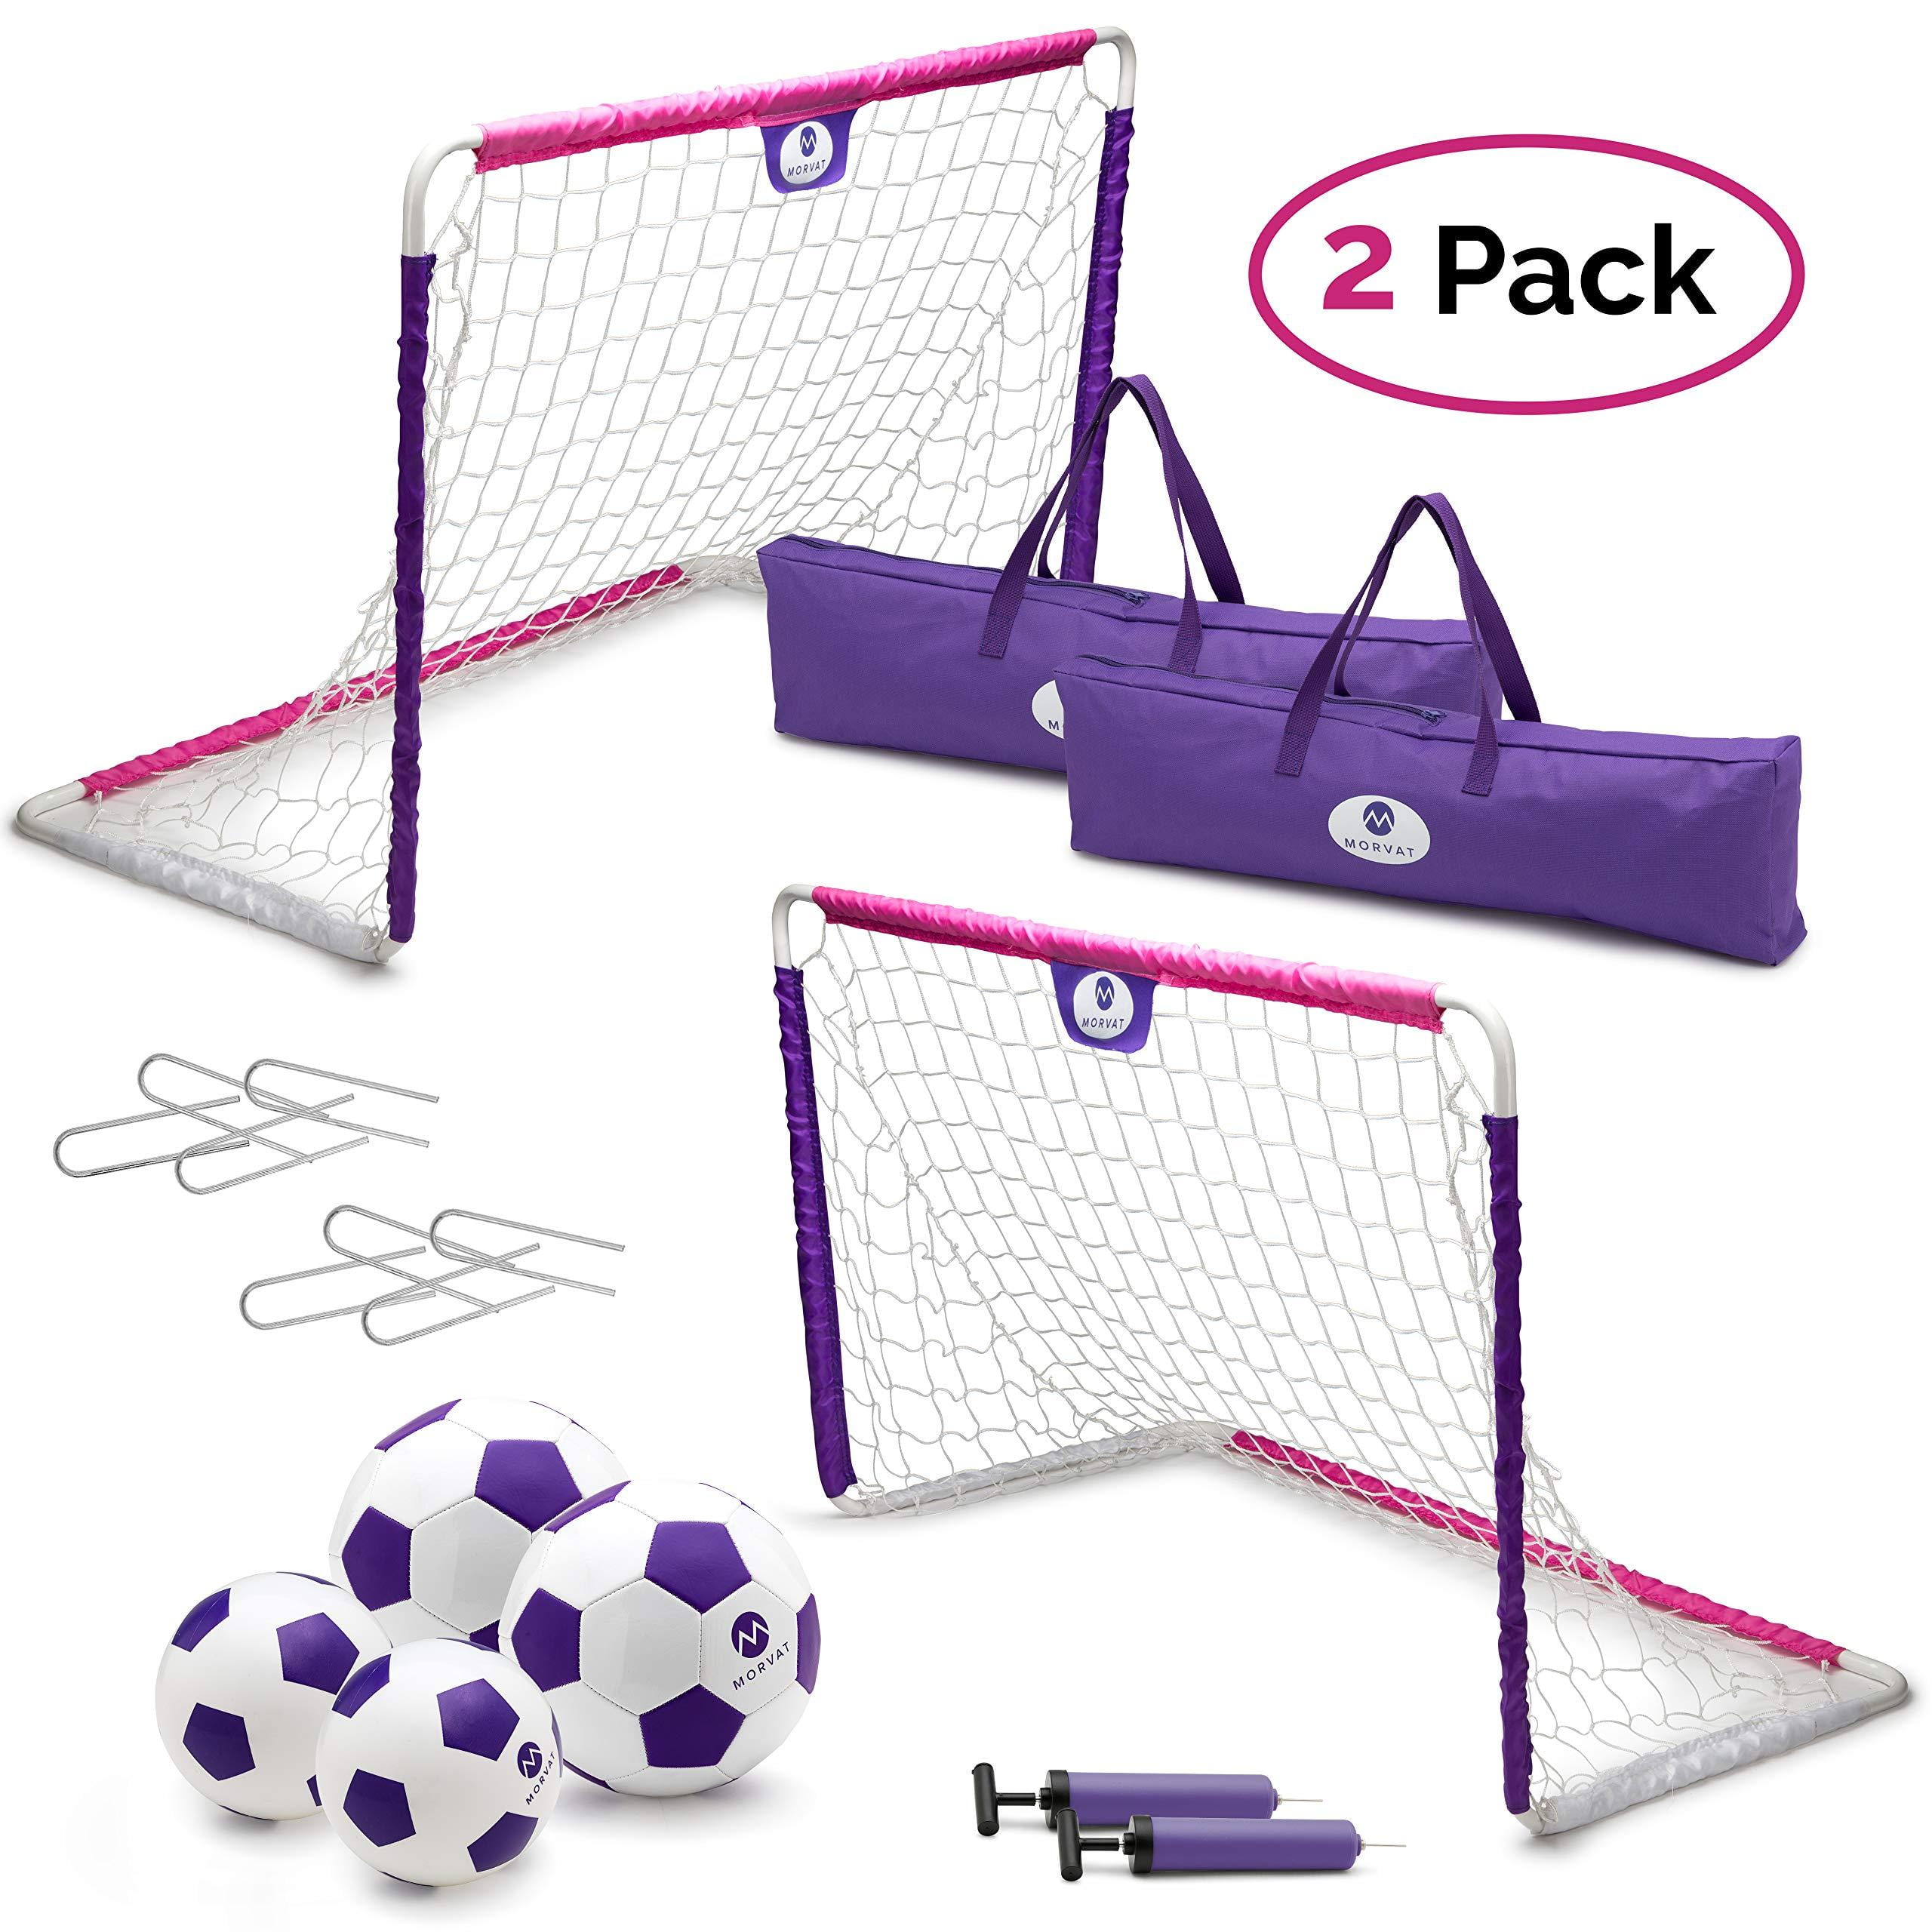 3.6' x 2.5' Kids Soccer Goals for Backyard Portable Soccer Net for Games and Training for Indoor or Outdoor Teens Soccer Practice Accessories with Carrying Bag 